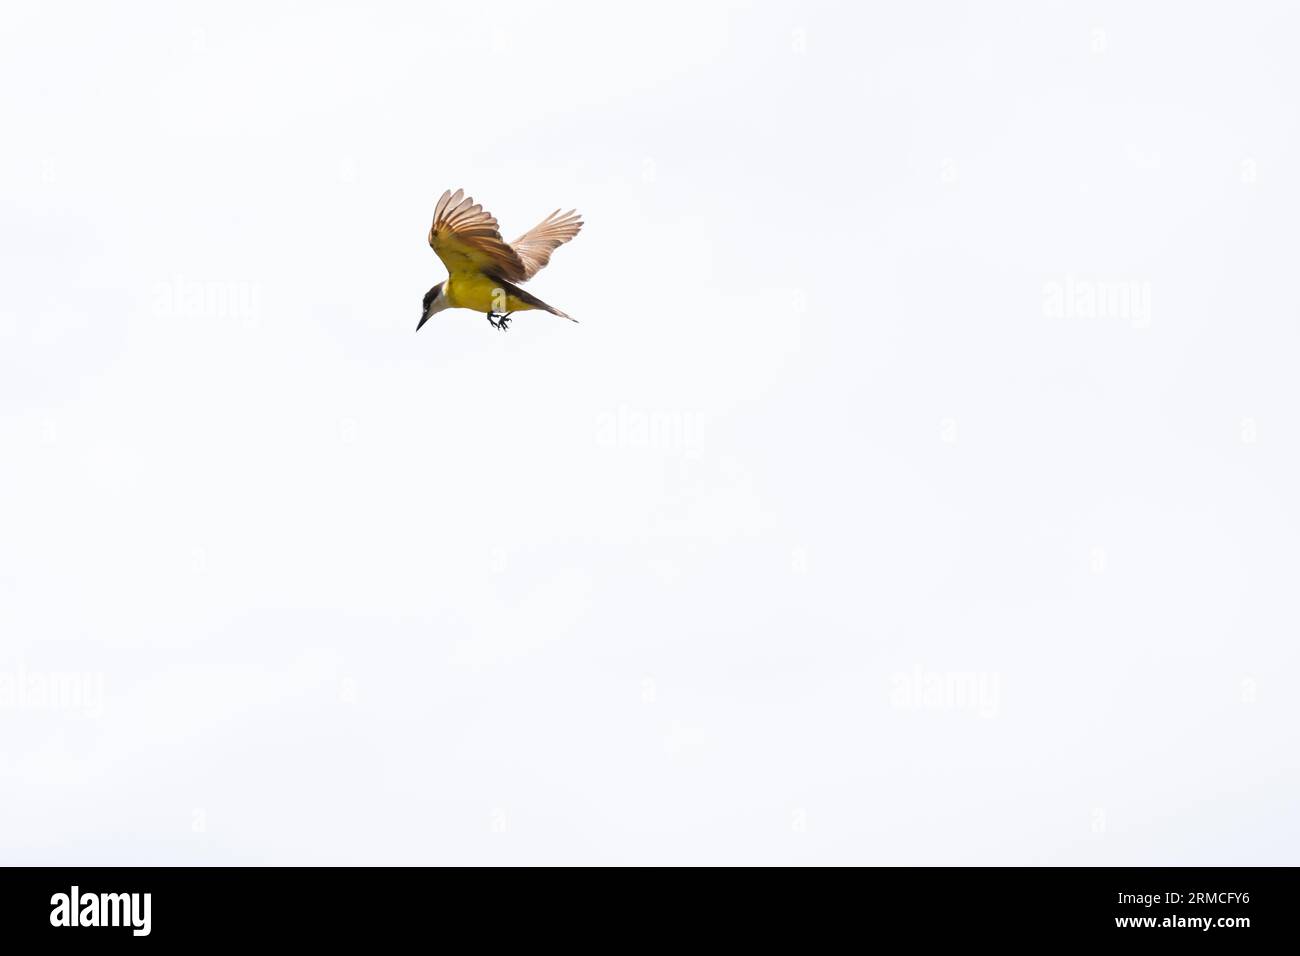 A yellow bird in full flight with open wings. Feeling of freedom. Wild life Stock Photo